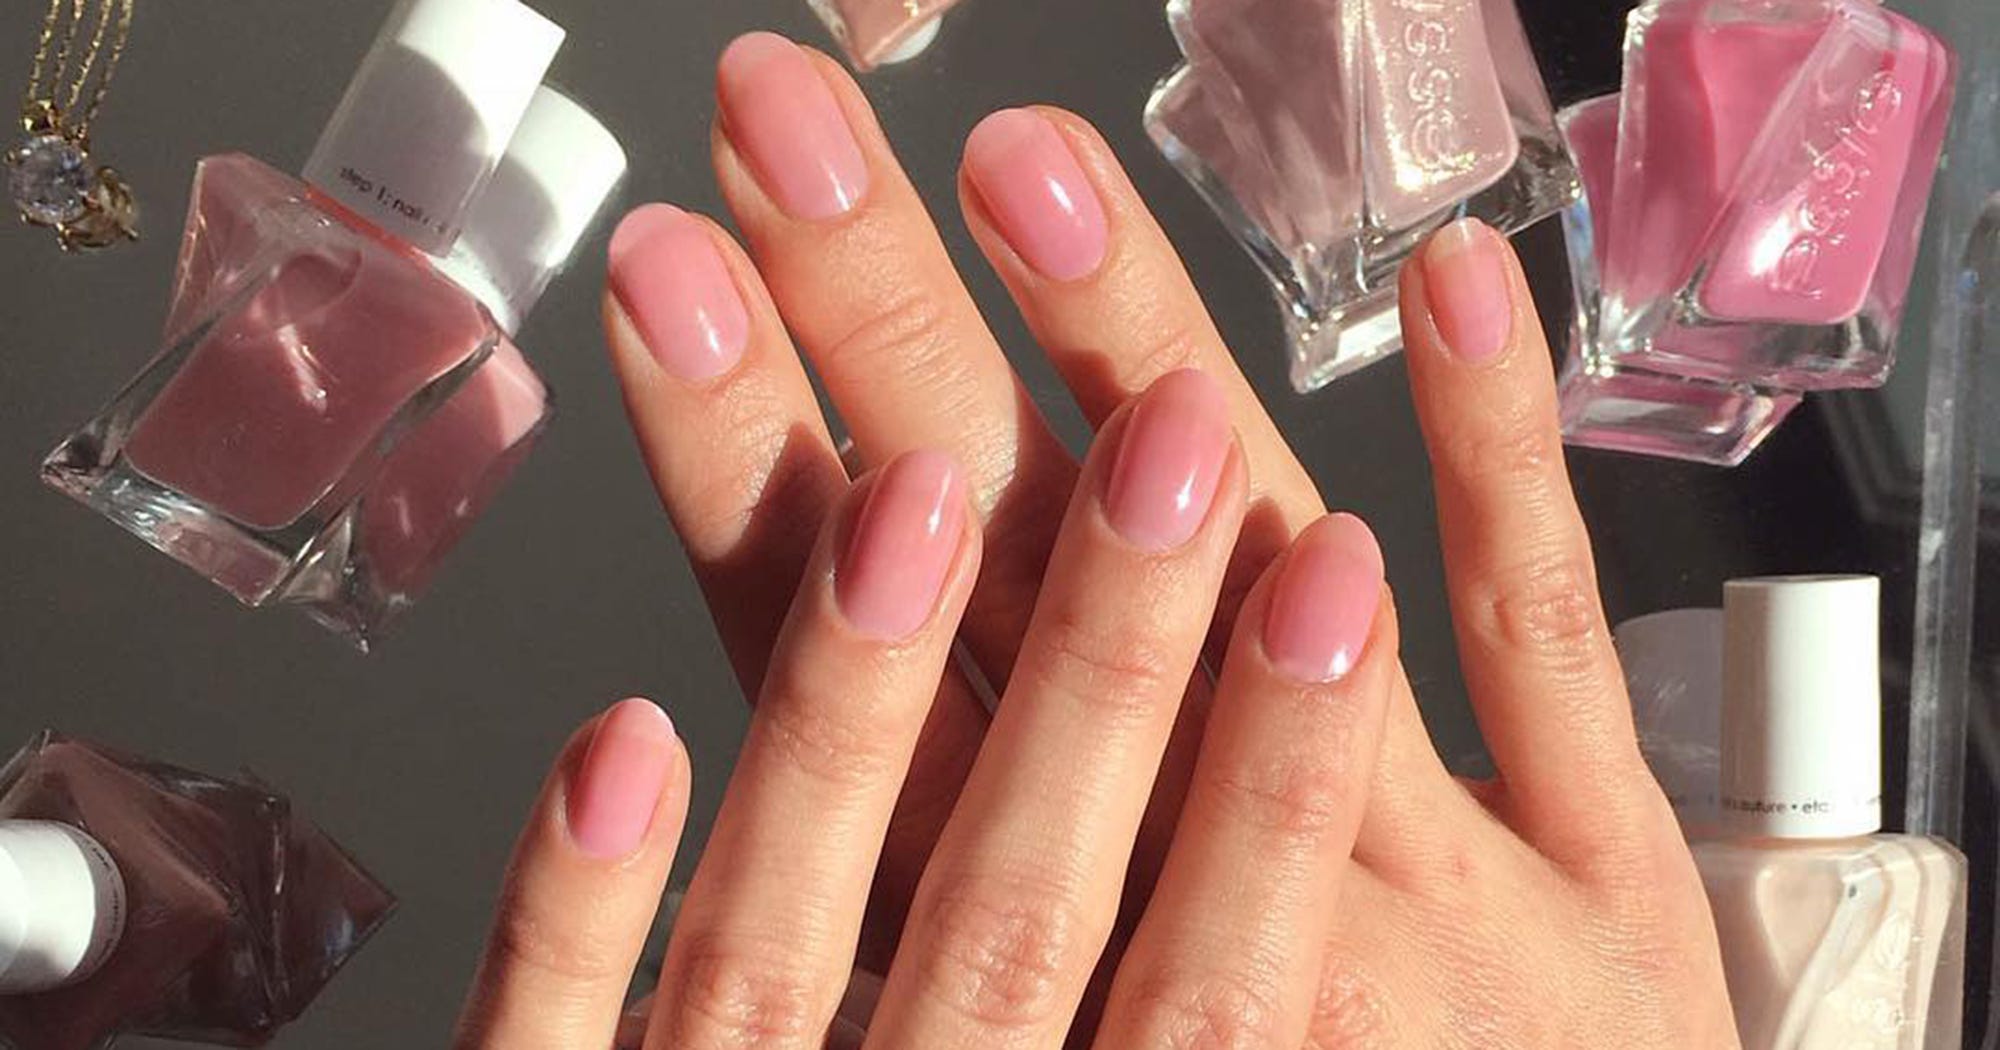 7. "Must-Try Light Pink Nail Colors for Darker Skin Tones" - wide 5